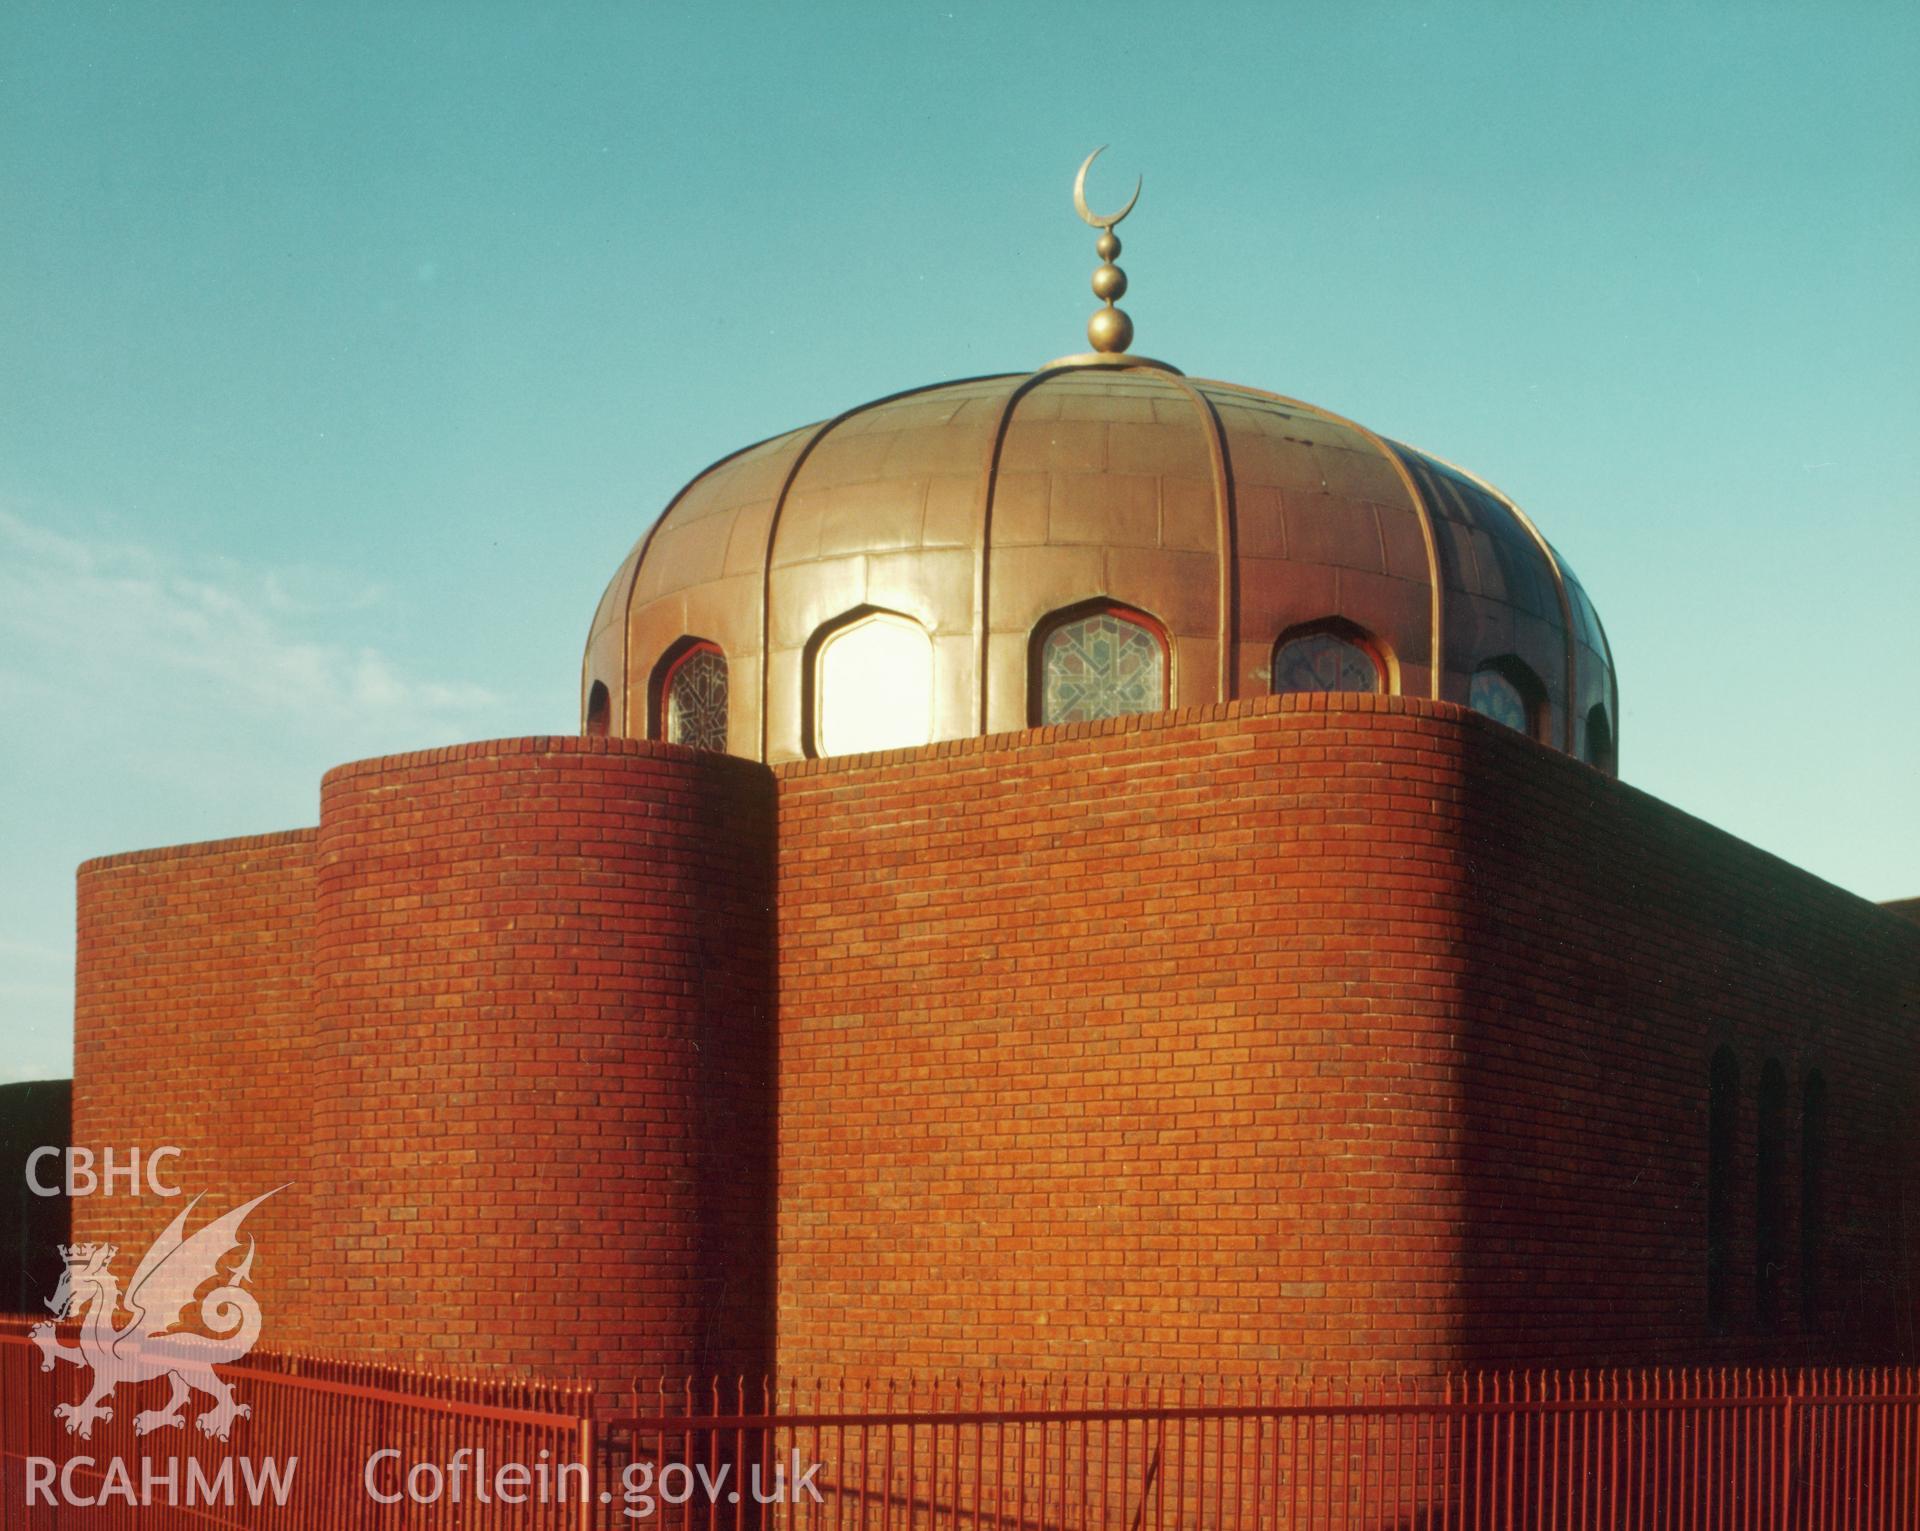 South Wales Islamic Centre, Alice Street, Cardiff. Image collated by the former Central Office of Information in 1984. The mosque has an impressive bronze dome around which are 16 stained glass windows designed by students of the College of Art, Swansea. The building includes a Women's centre, school, and main temple for worship.